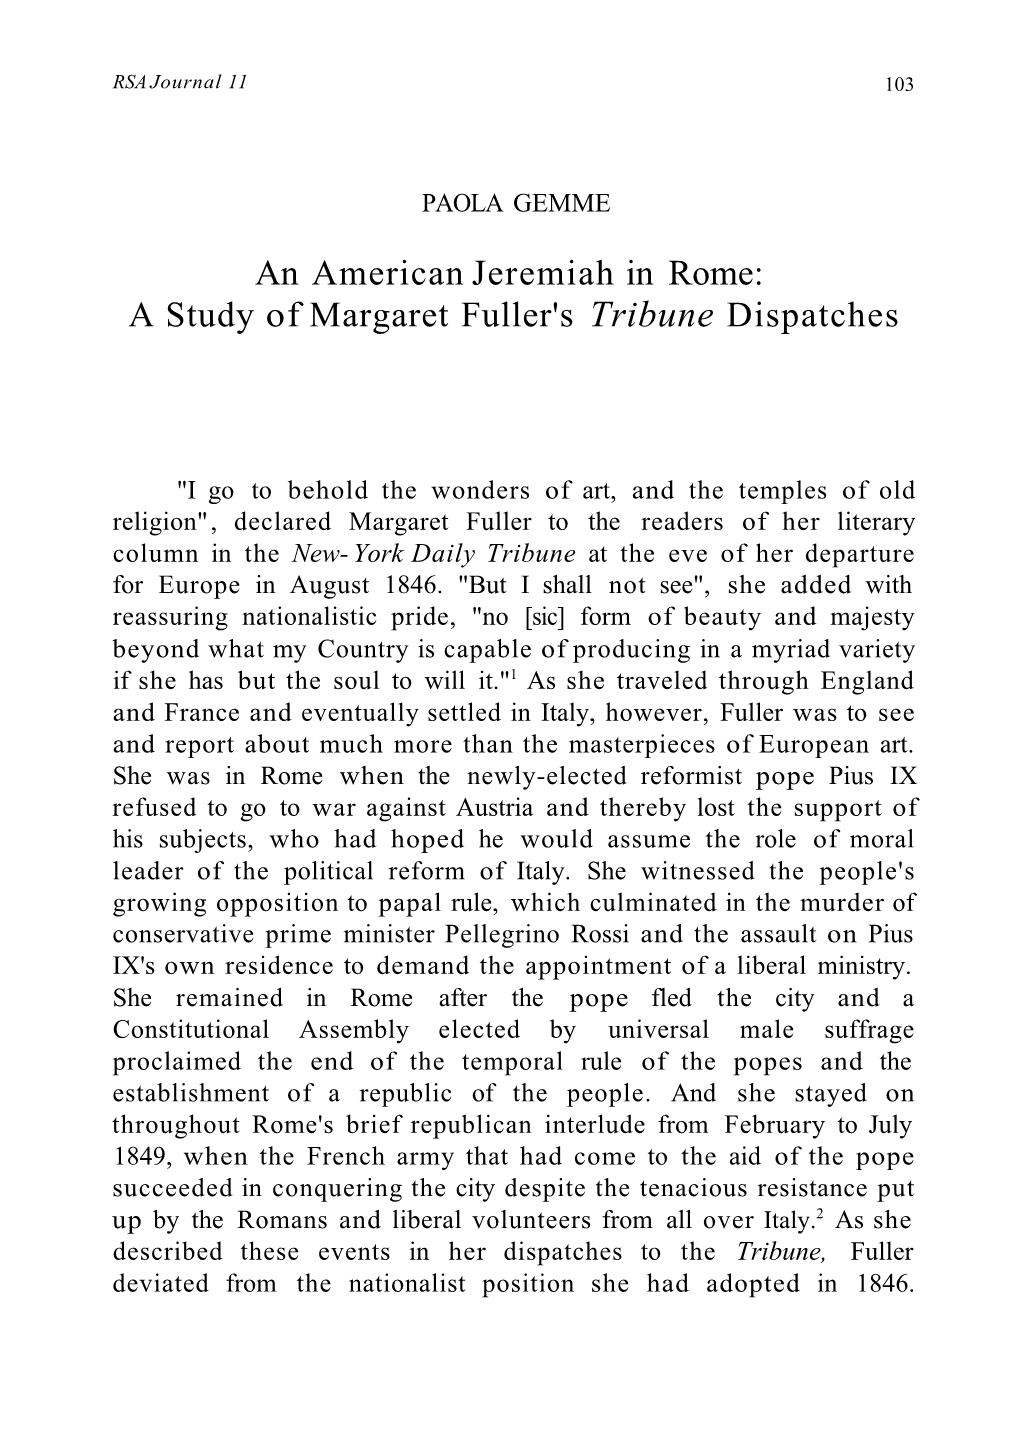 An American Jeremiah in Rome: a Study of Margaret Fuller's Tribune Dispatches